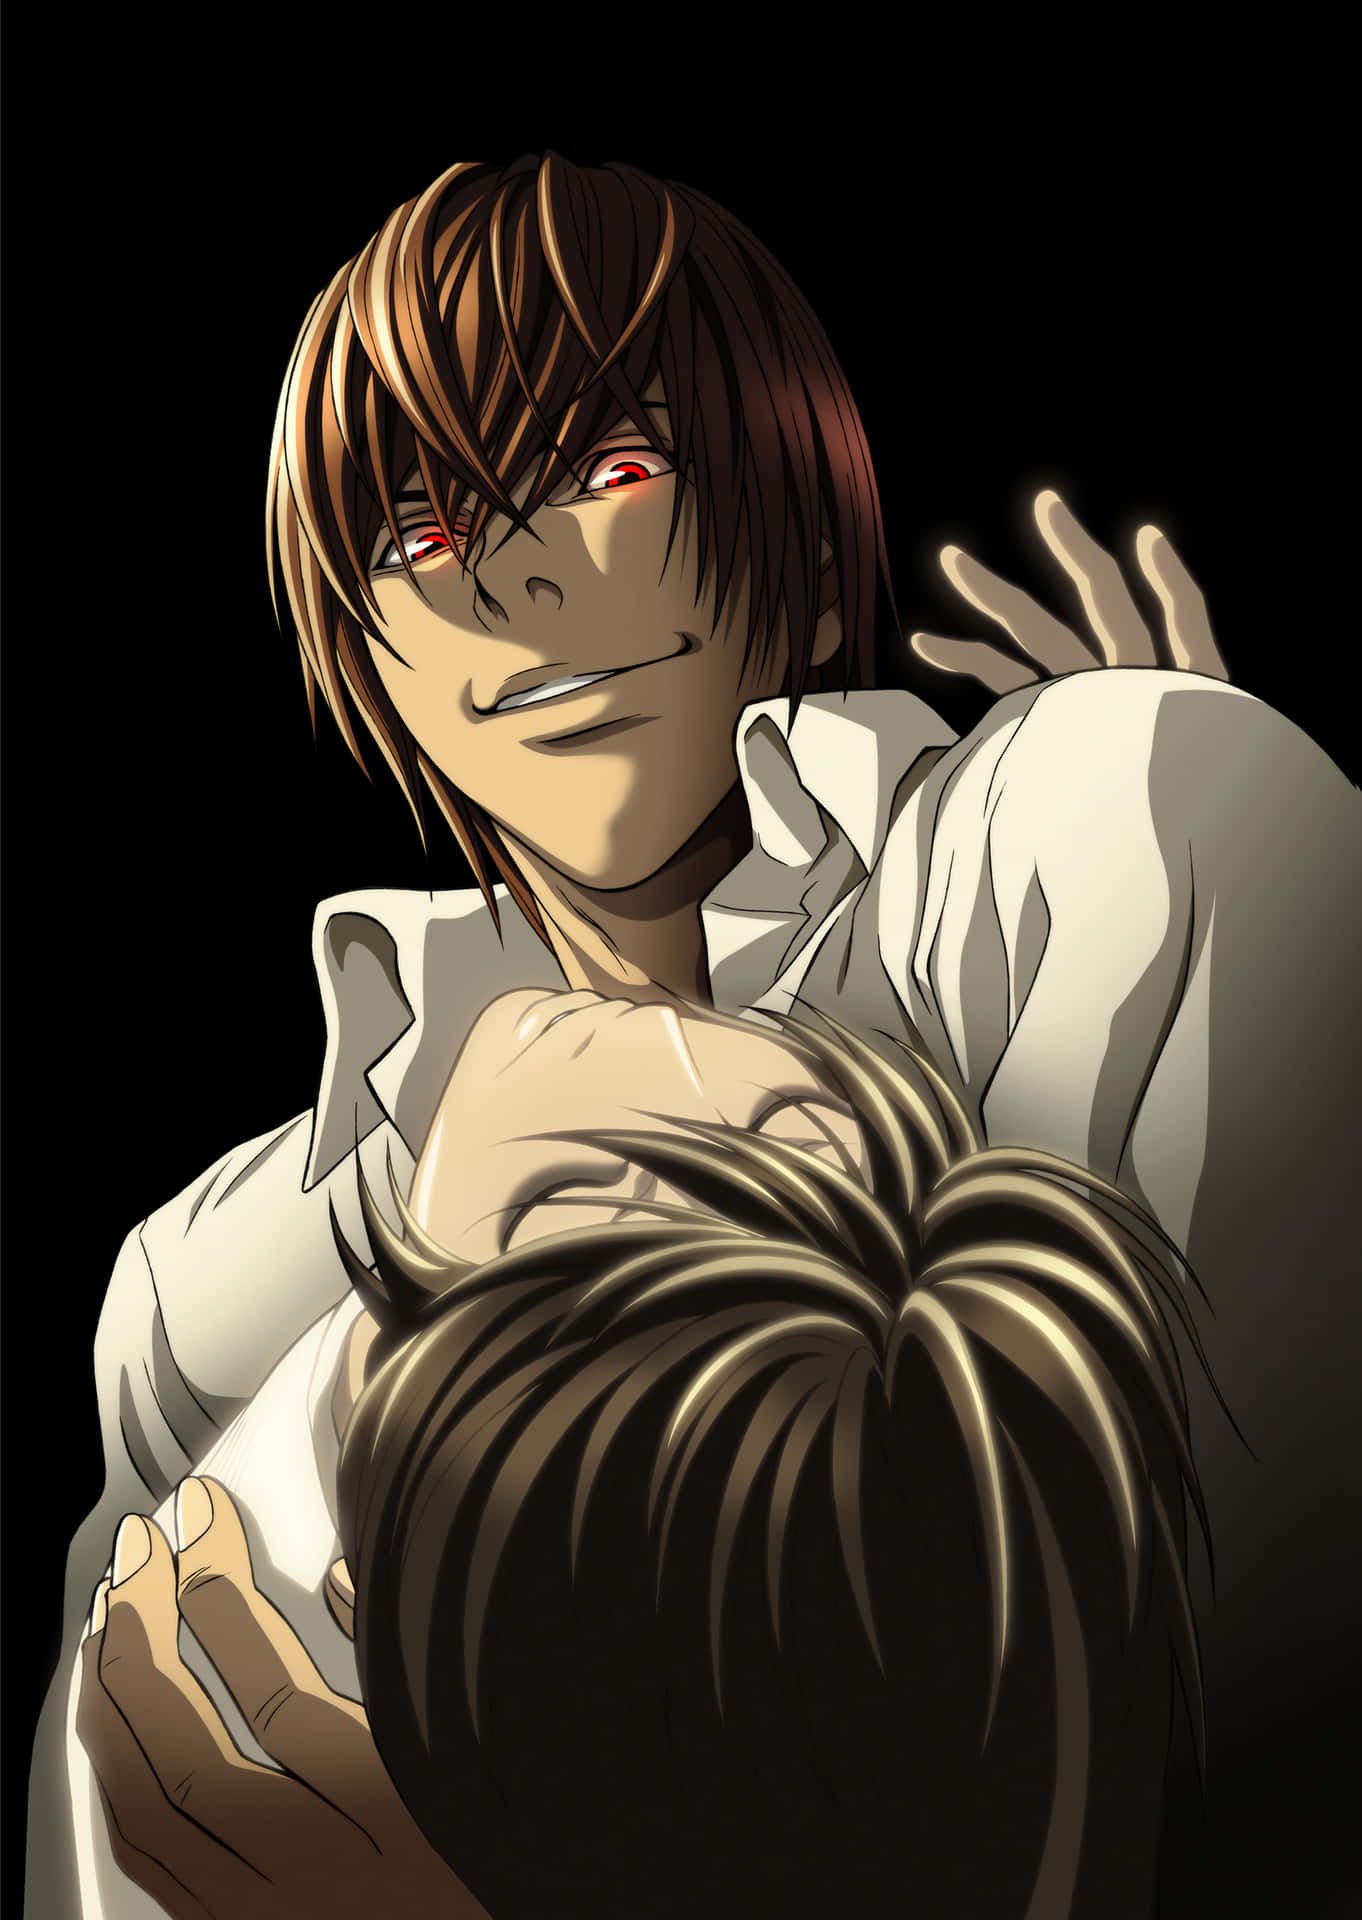 Light Yagami writes critical entries in his Death Note